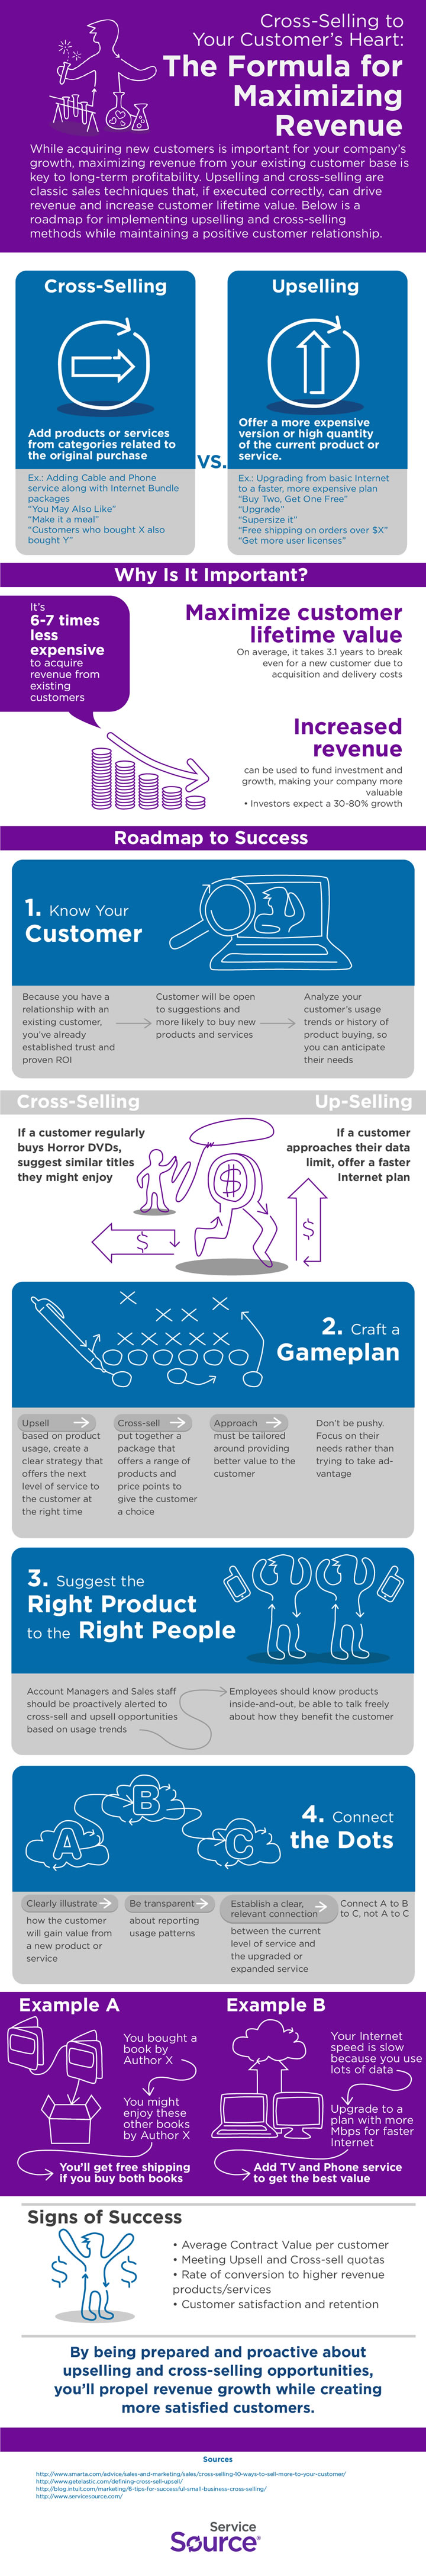 Cross-Selling to Your Customer's Heart Infographic